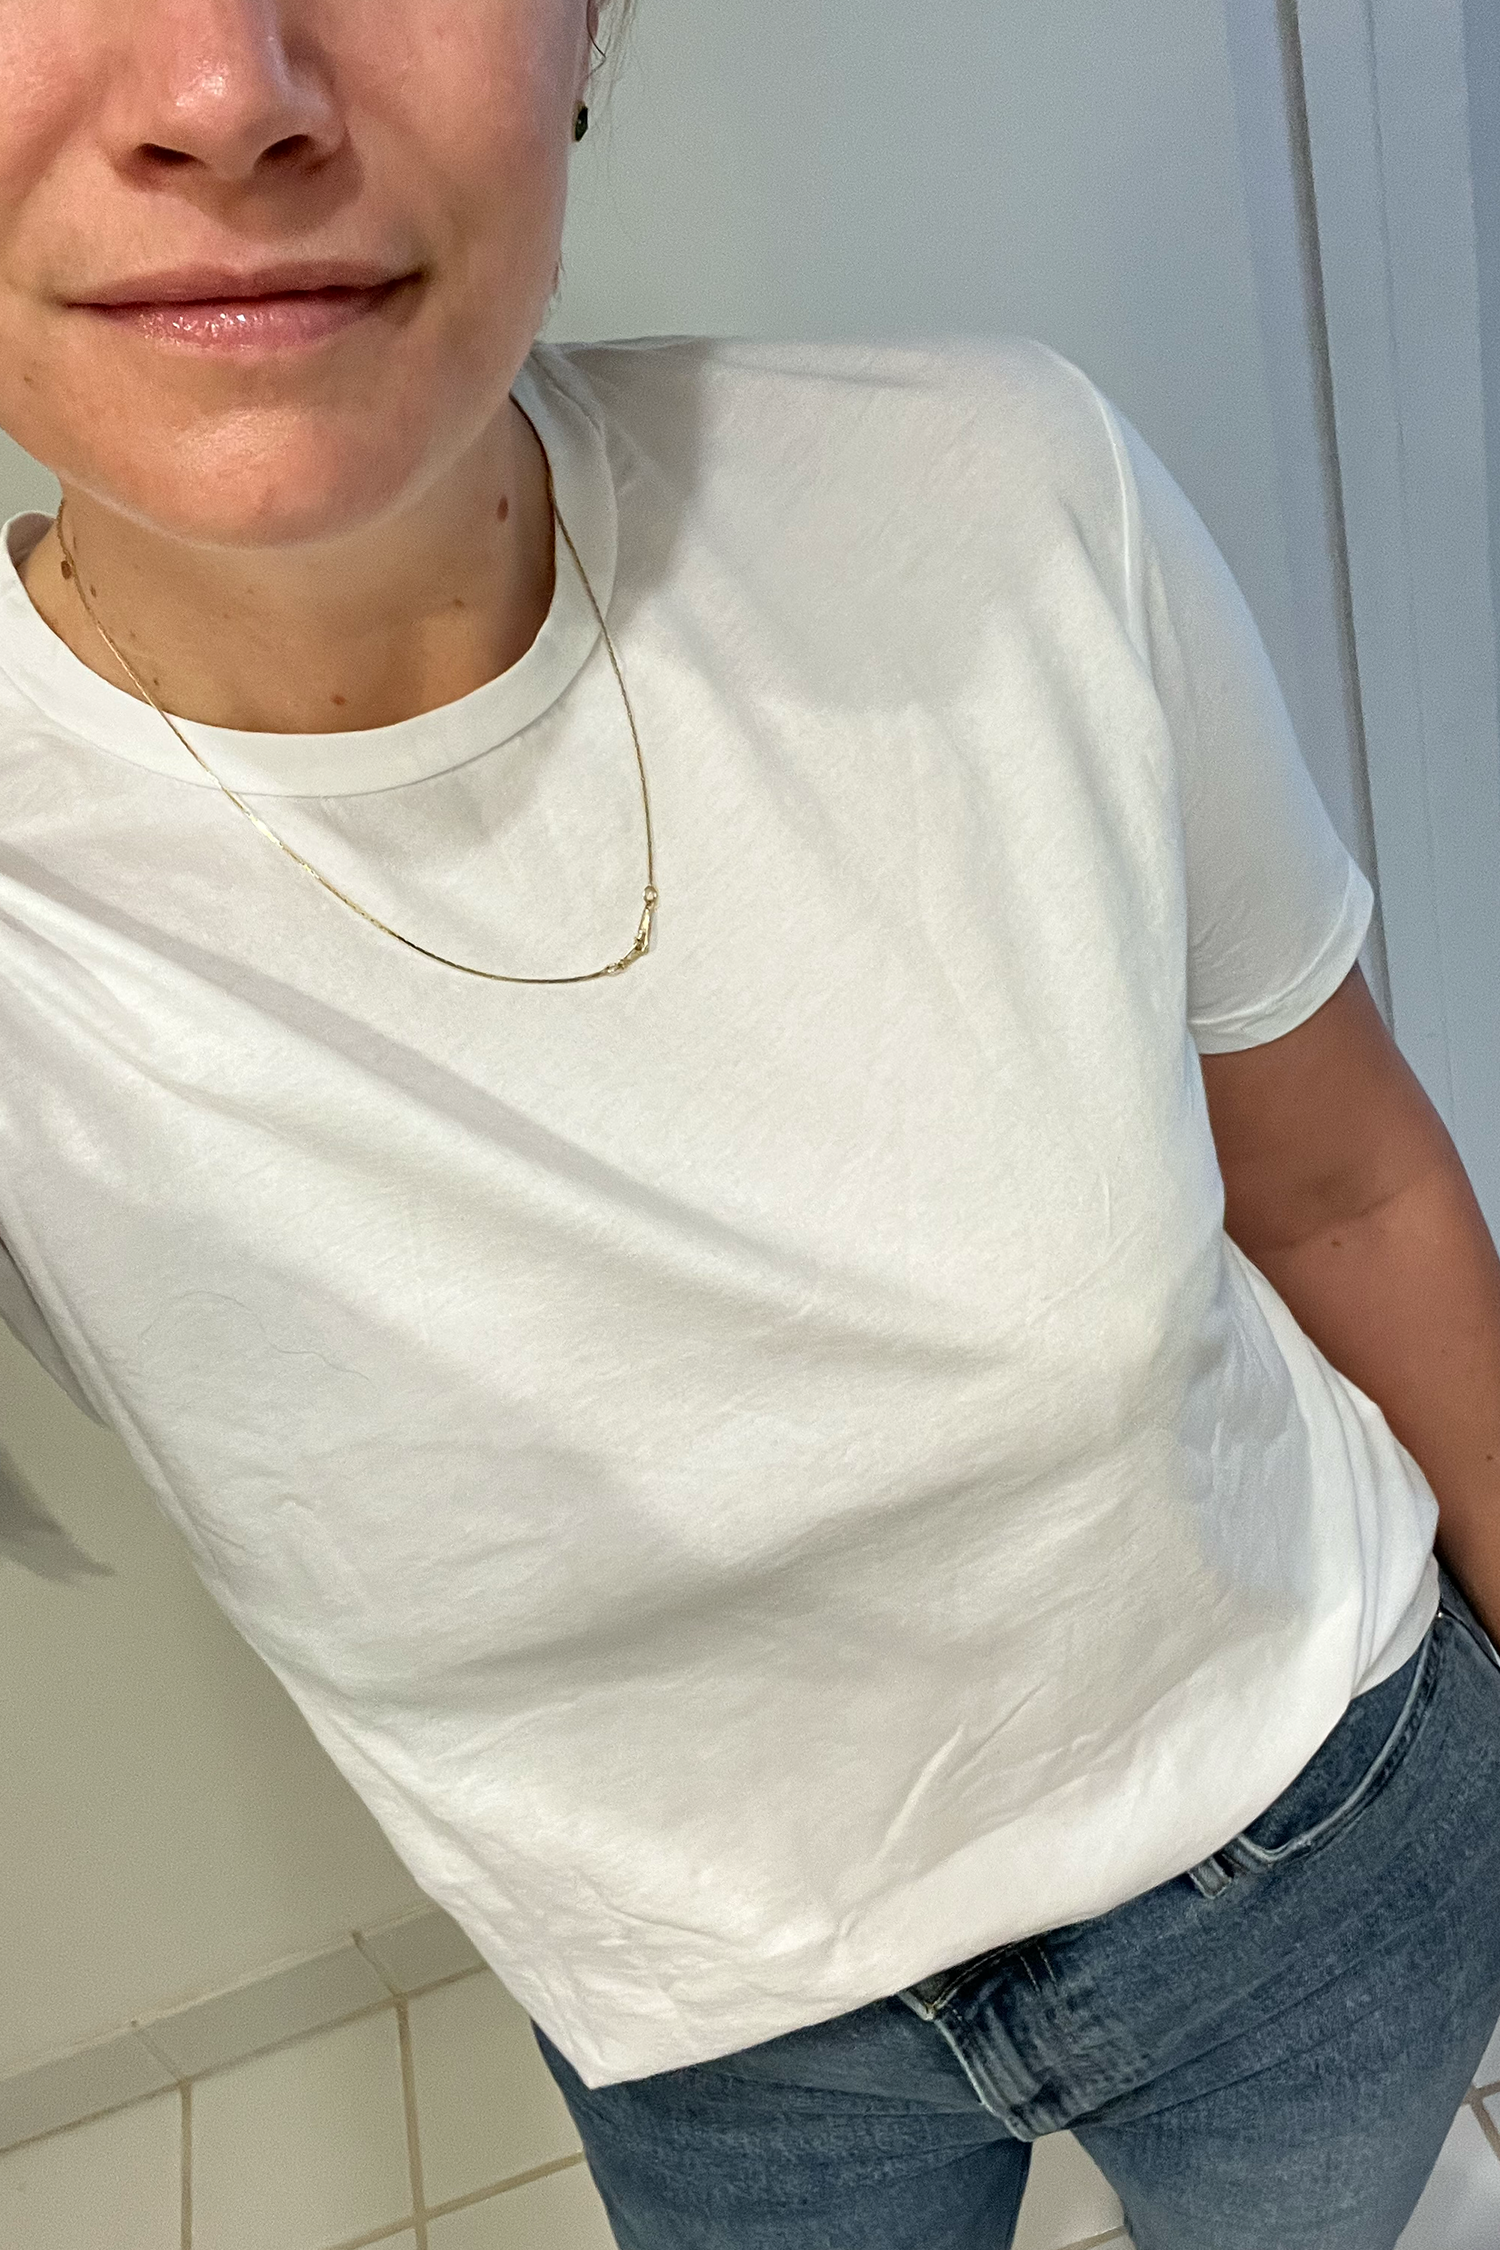 A new favorite white tee